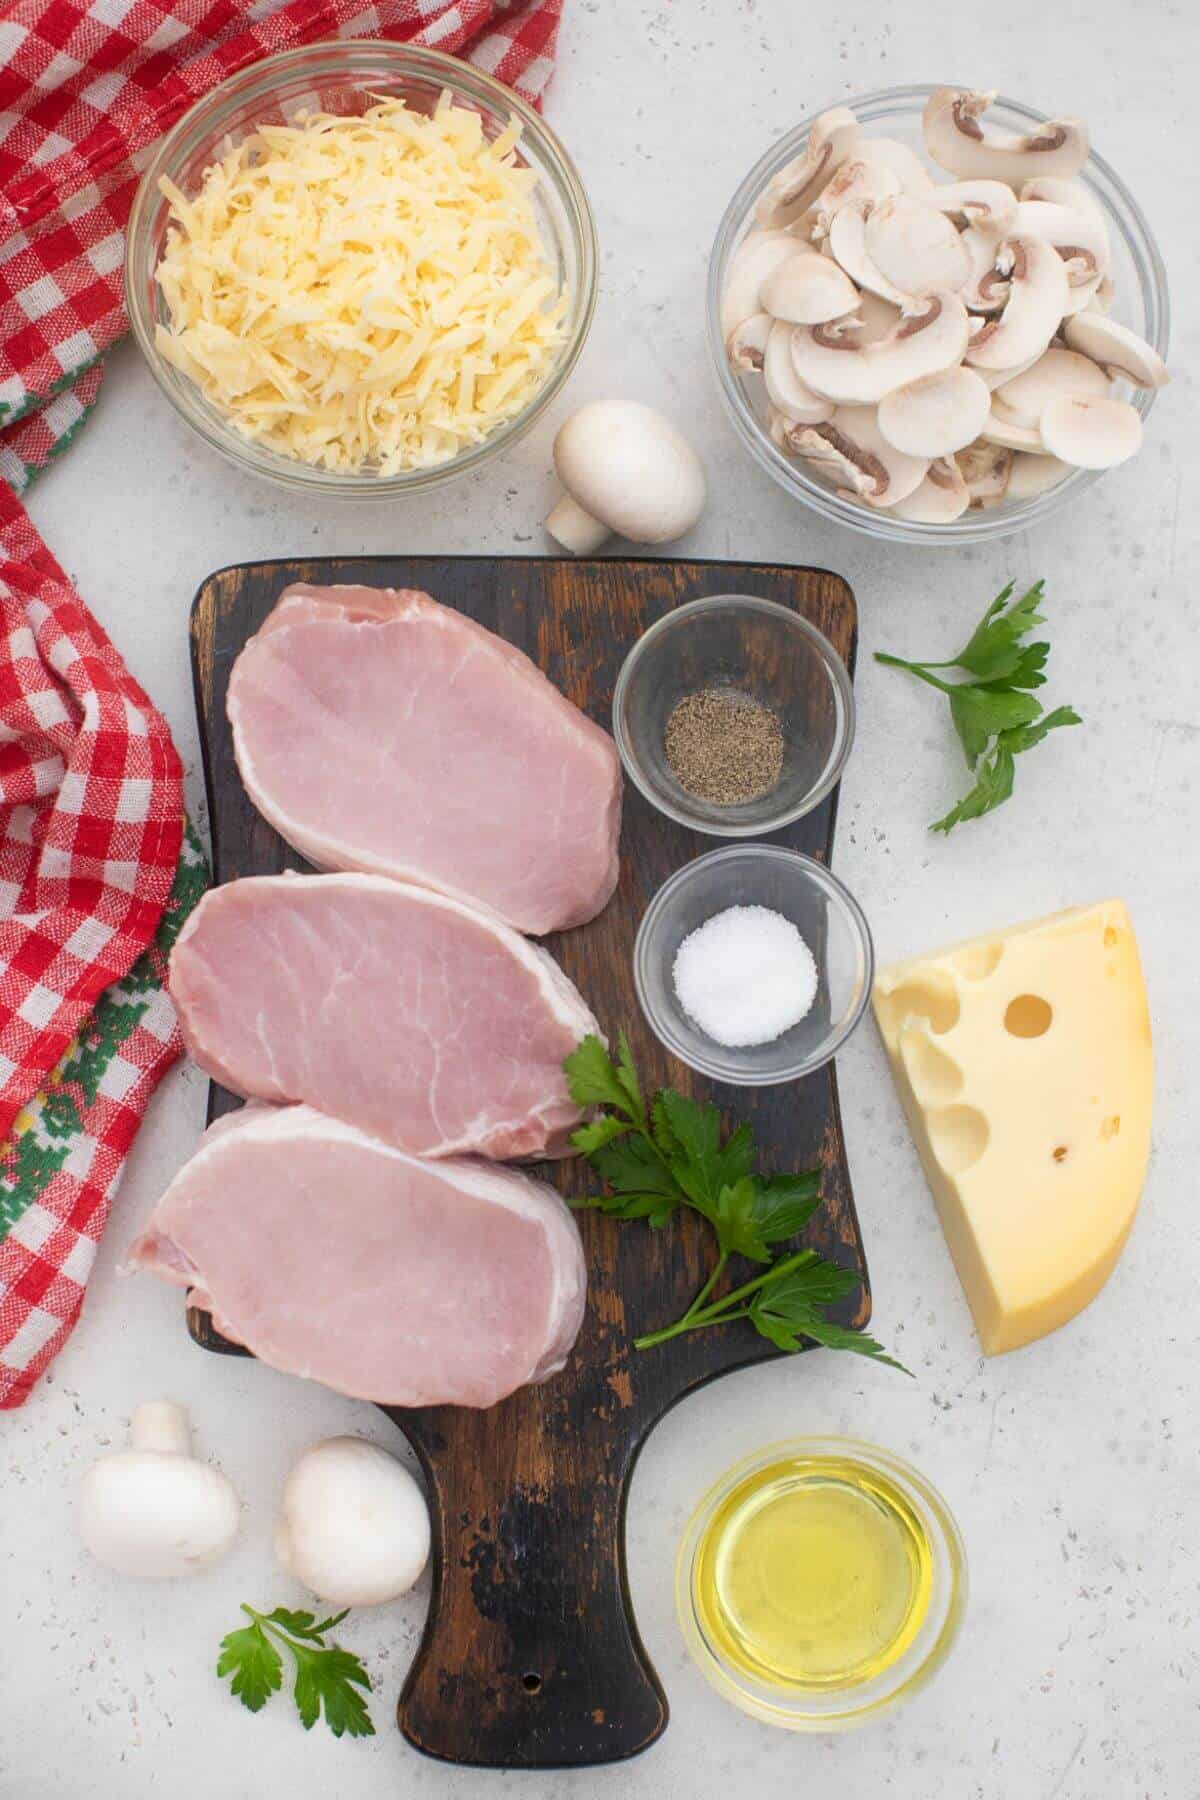 Boneless pork chops, cheese, mushrooms and other ingredients on a cutting board.